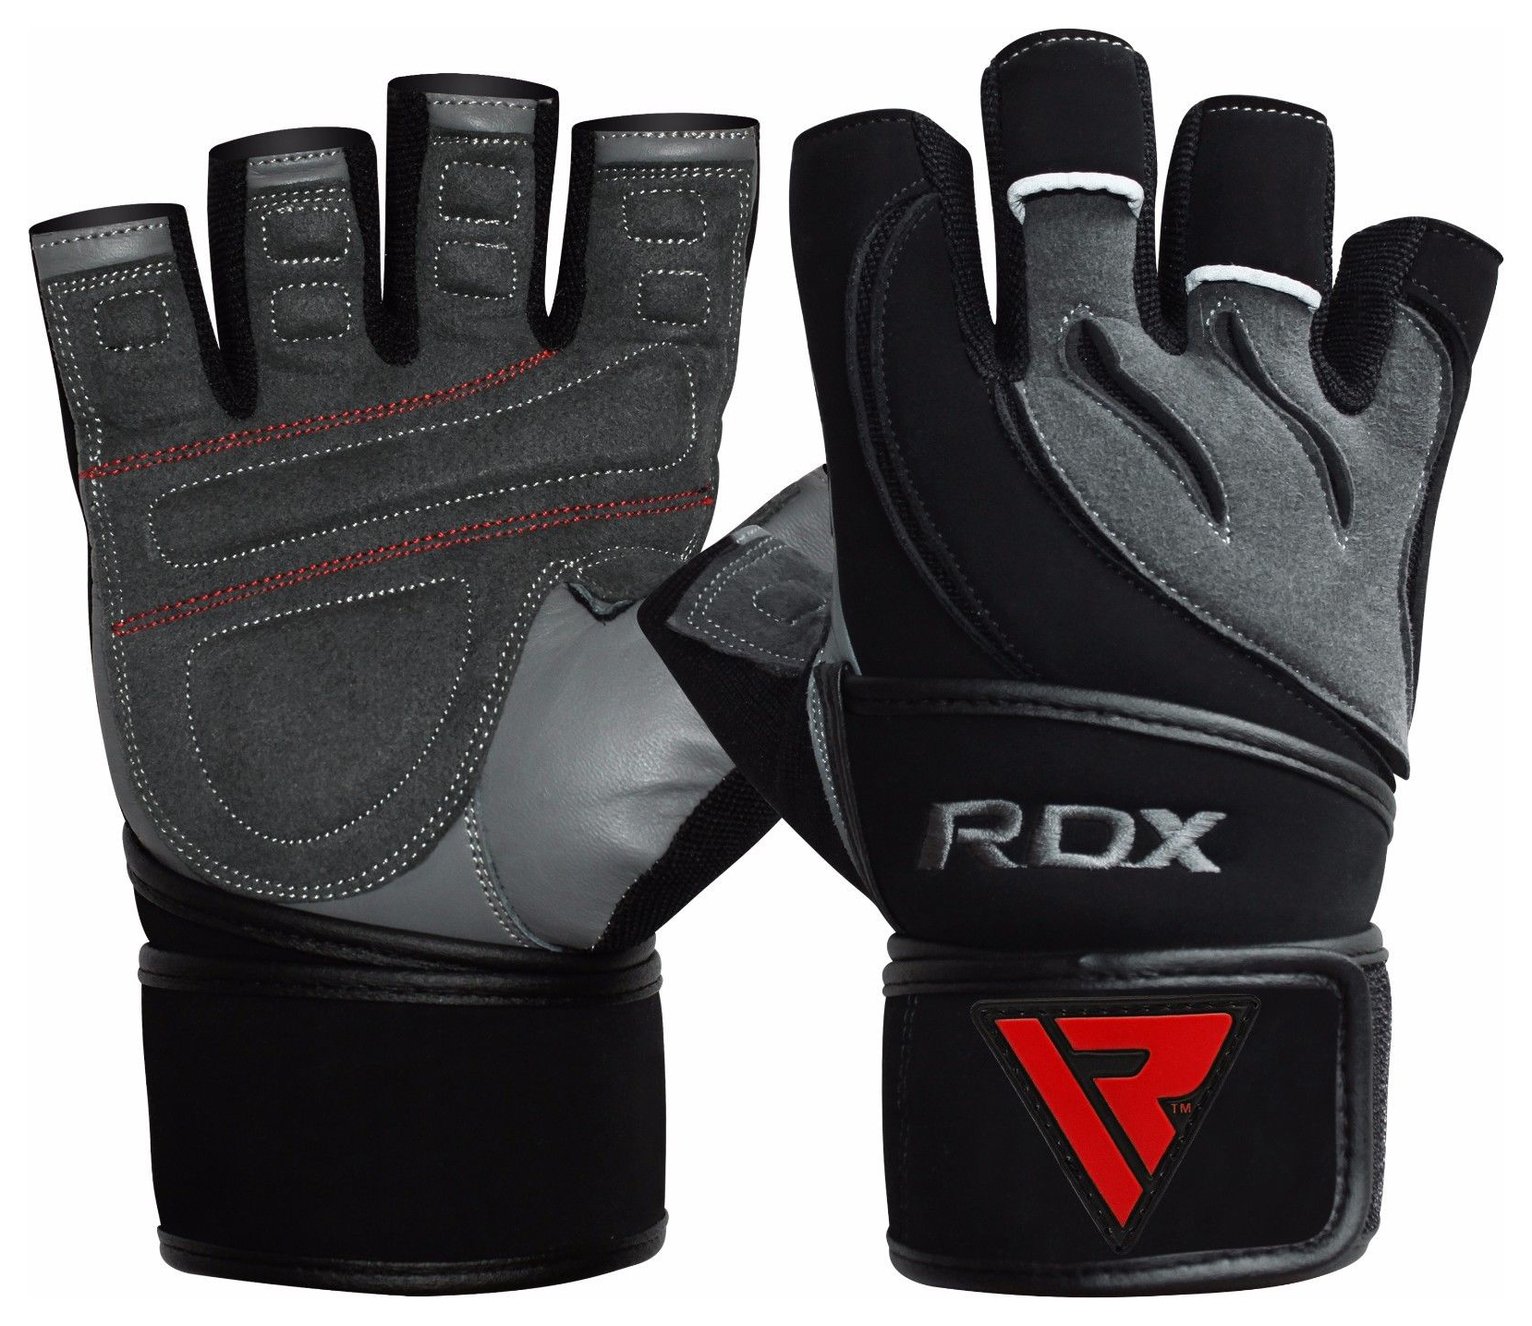 RDX Medium/Large Fitness Gloves review